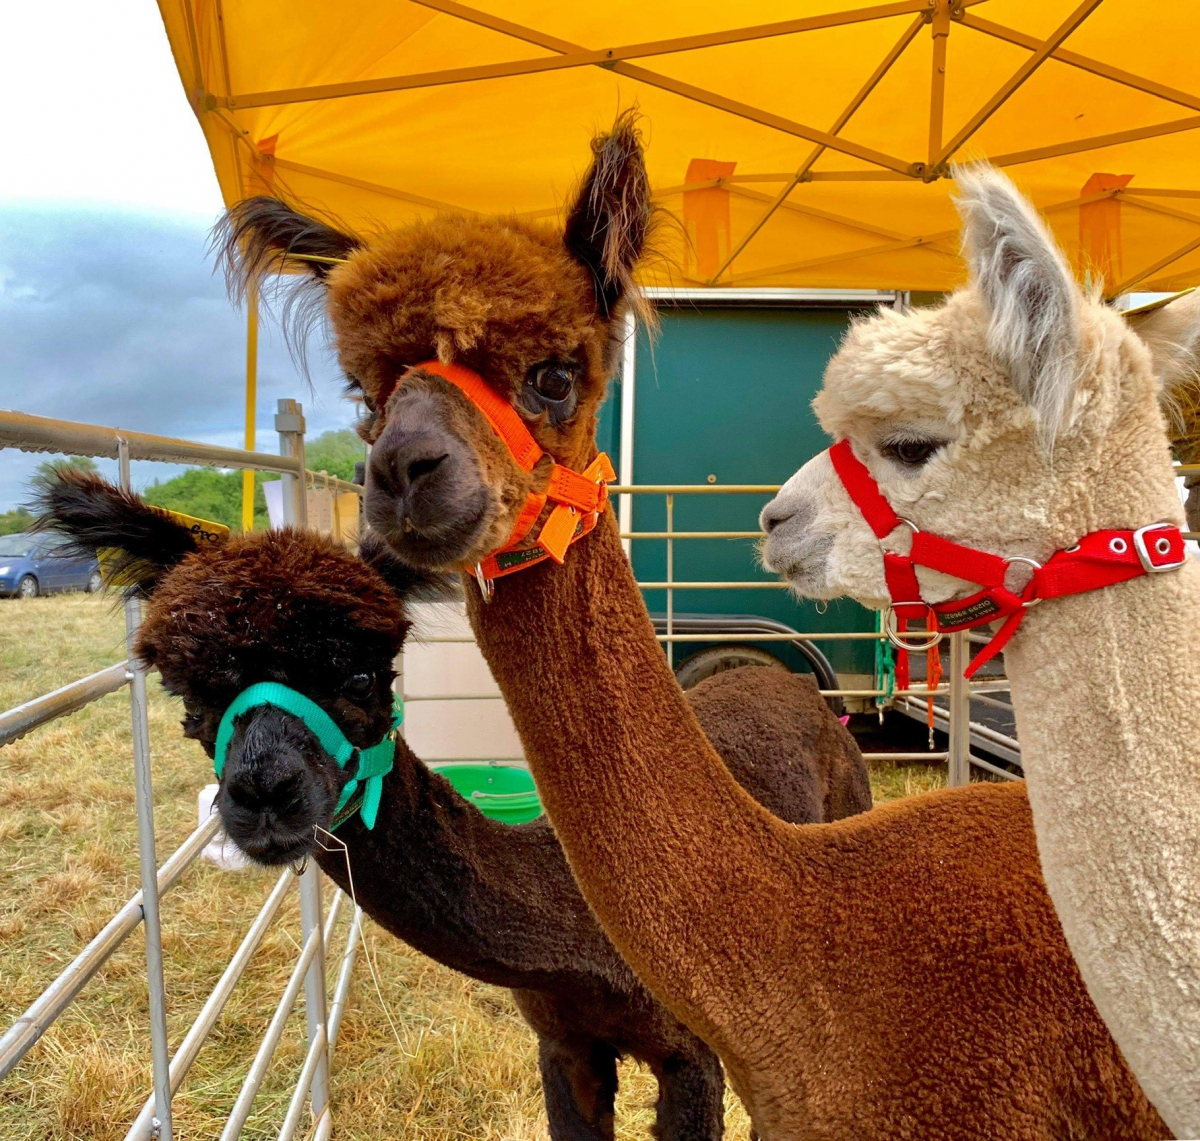 The lovely alpacas, Raymond, Parsnip and Pumpkin were a great hit at the festival